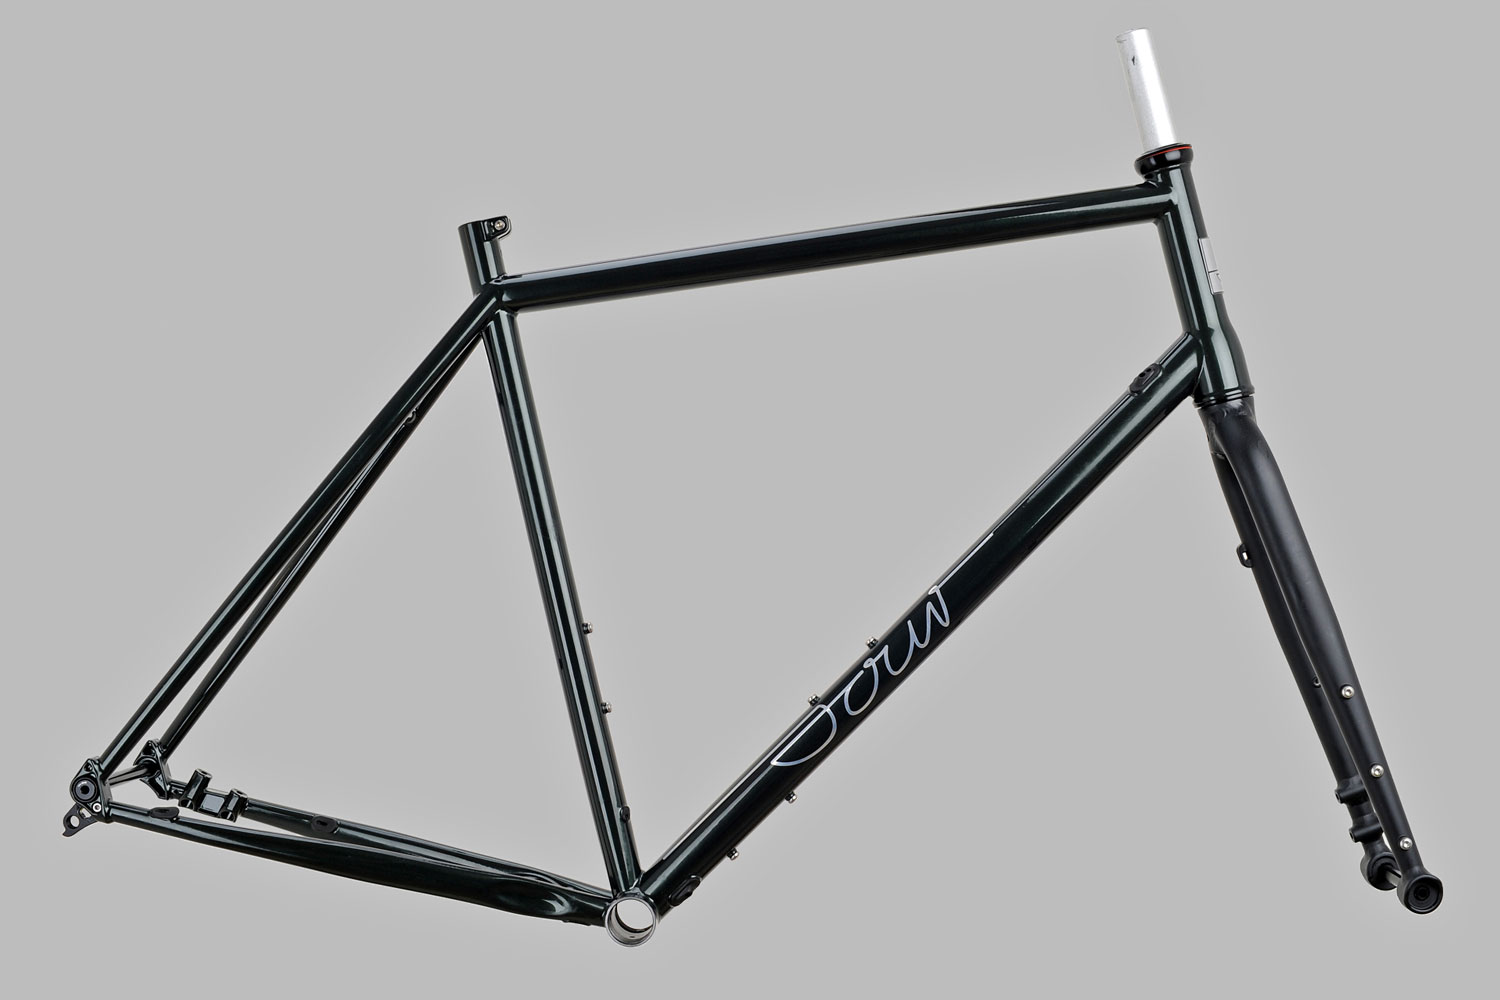 2021 Sour Bikes affordable steel frame updates Clueless